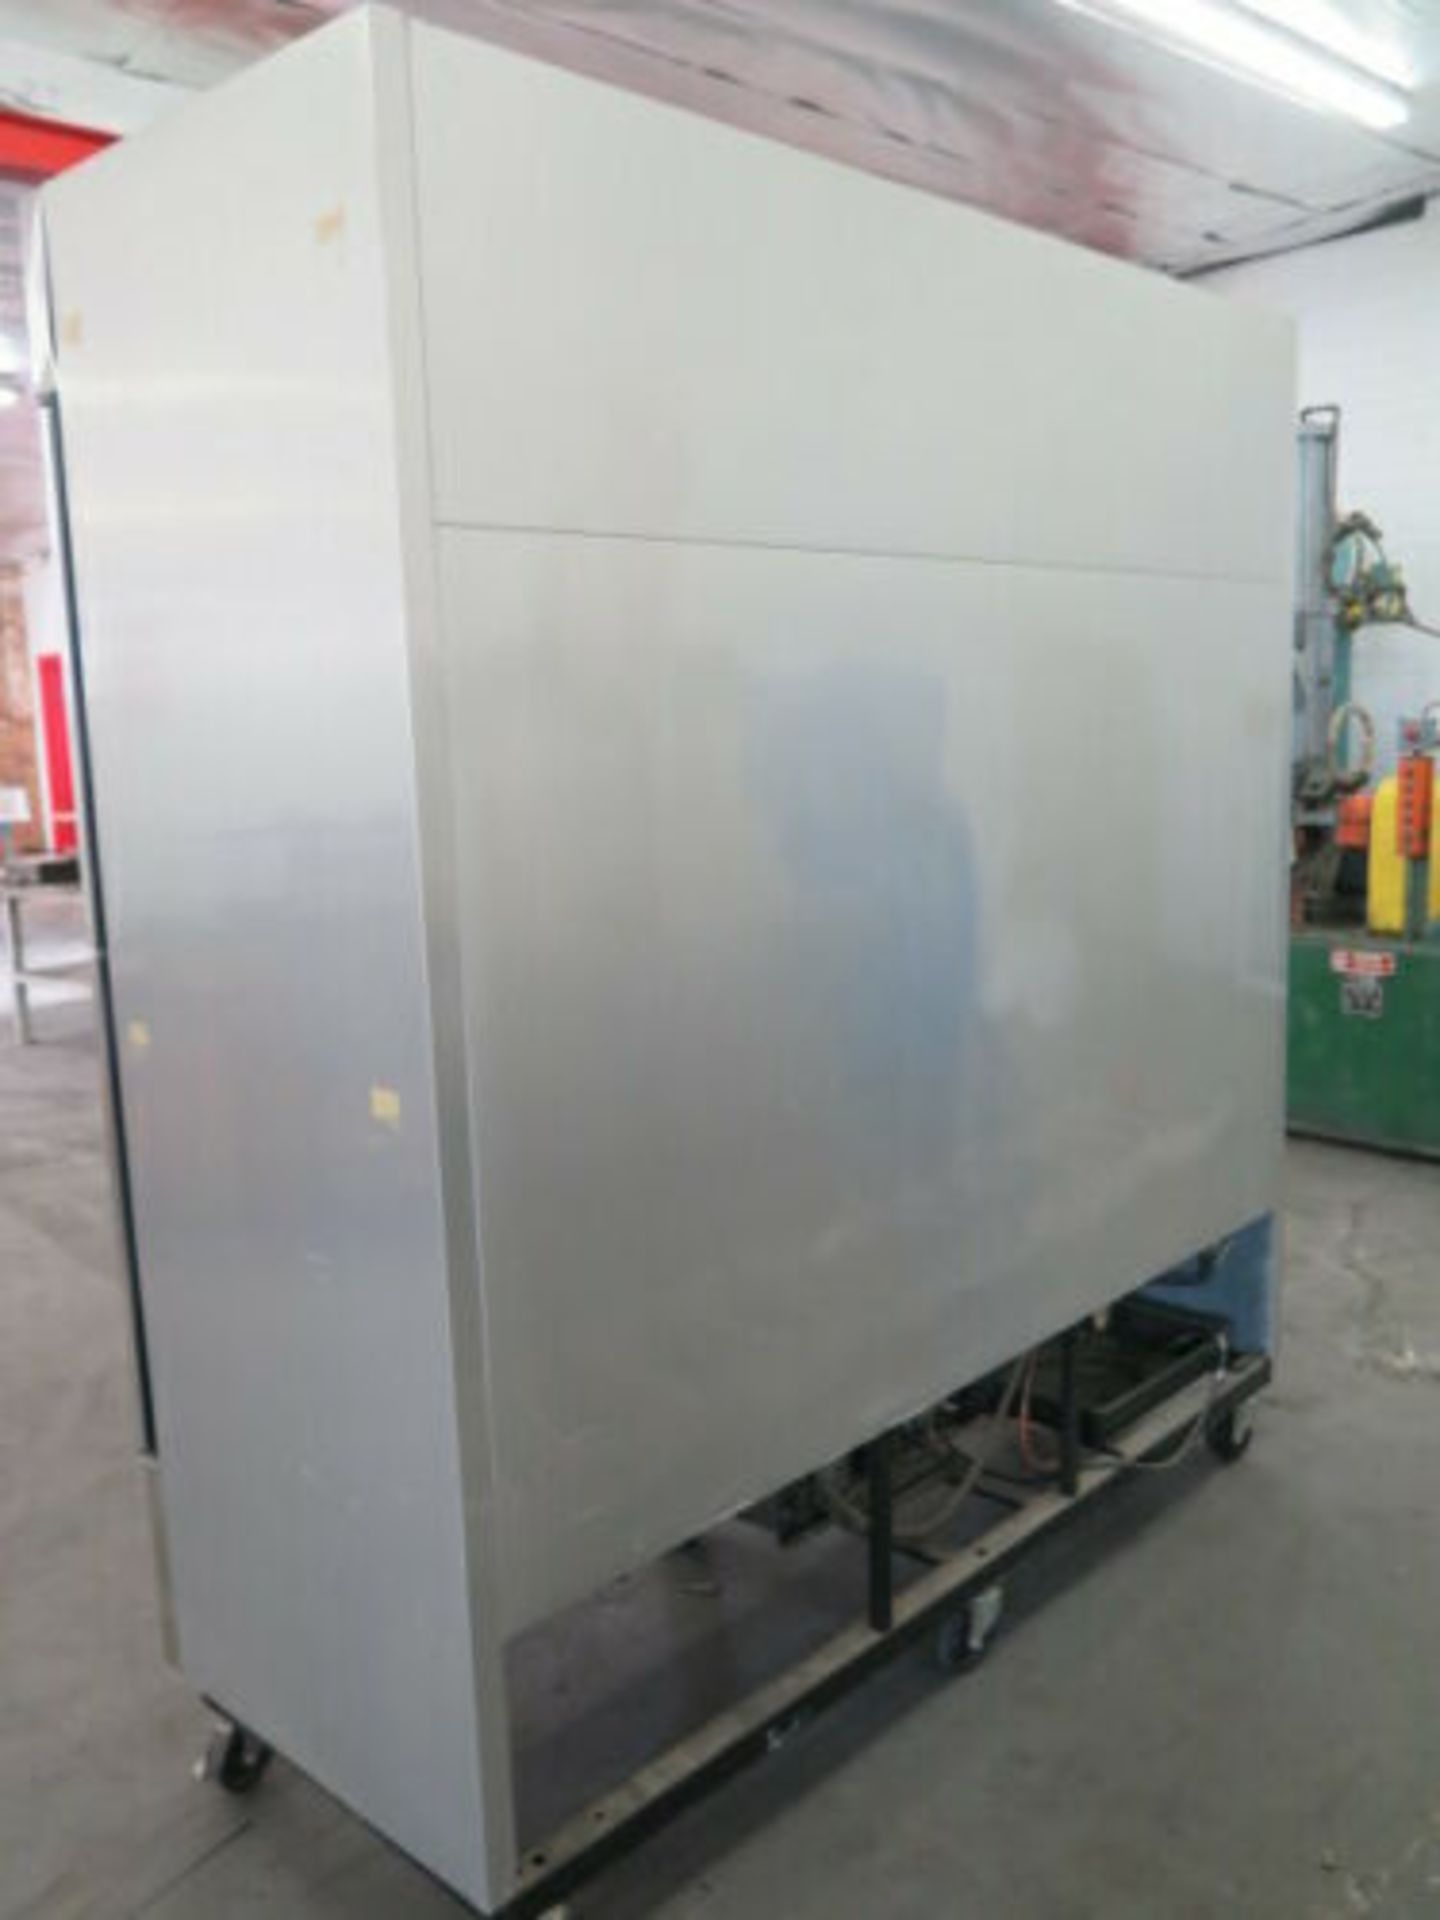 True Mfg. mdl. T-72G-6 6-Door Stainless Steel and Glass Industrial Refrigerator s/n 1-4583449 - Image 8 of 9